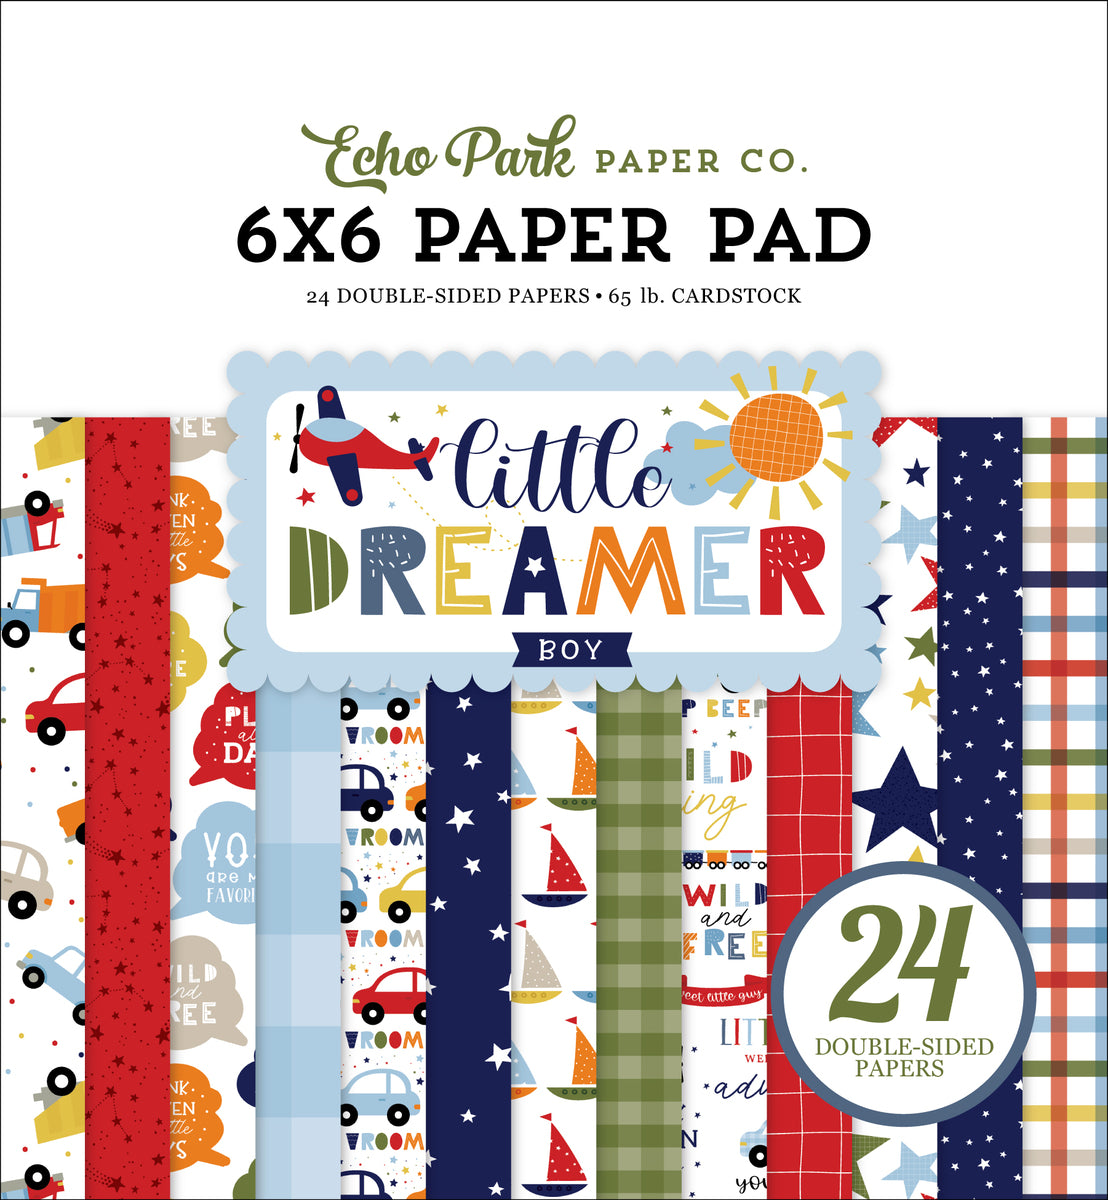 Little Dreamer Boy 6x6 patterned paper pad from Echo Park Paper